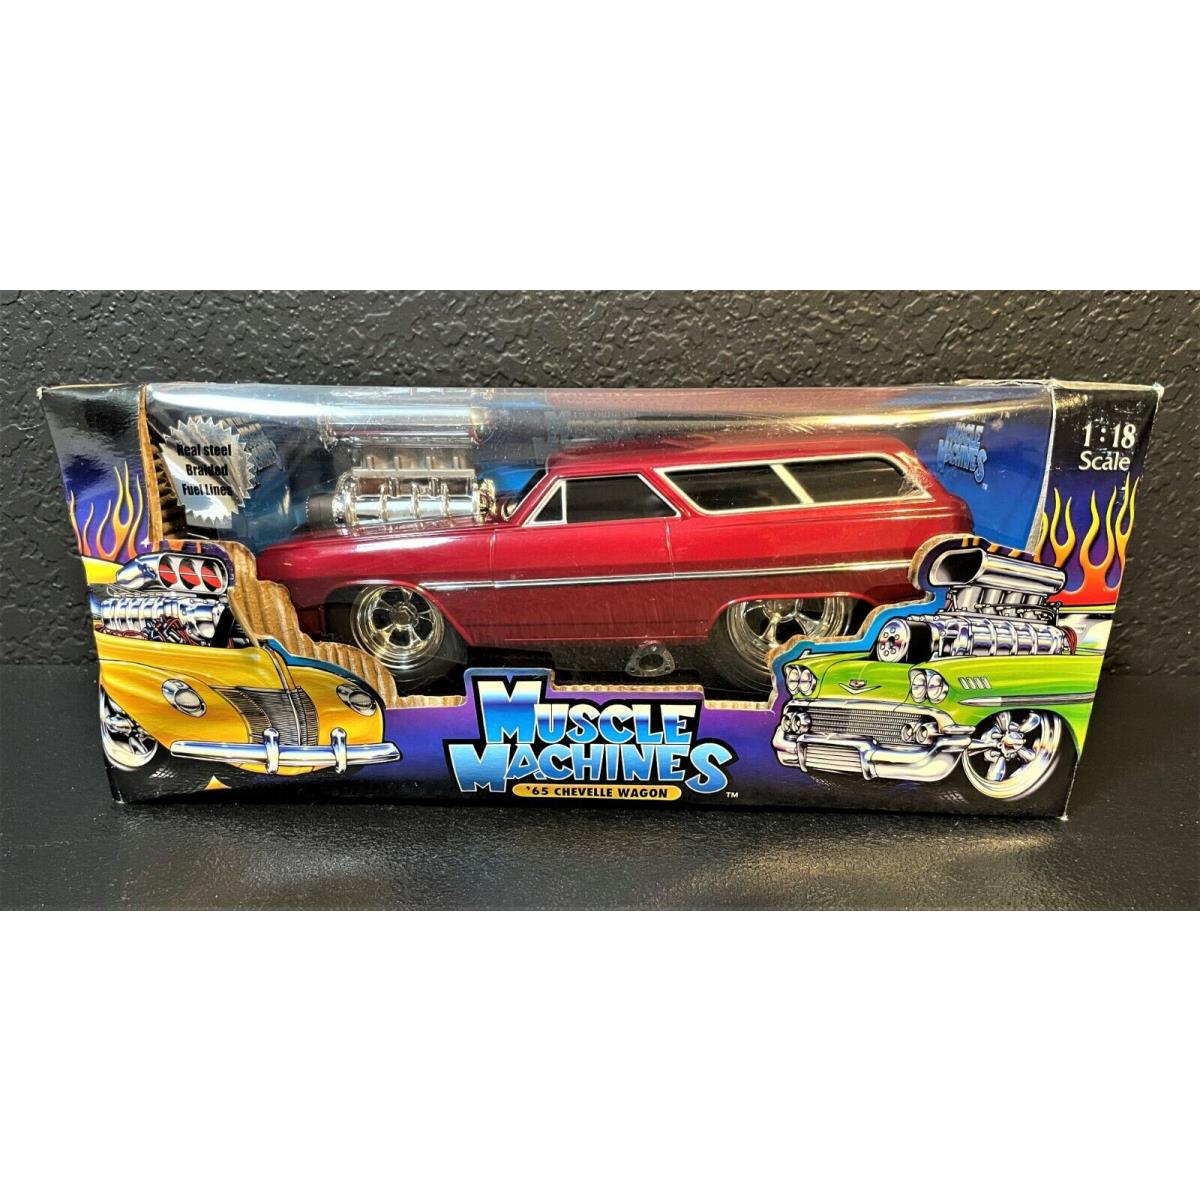 Hot Wheels Collectibles Customized `65 Chevelle Wagon 1:18 Scale